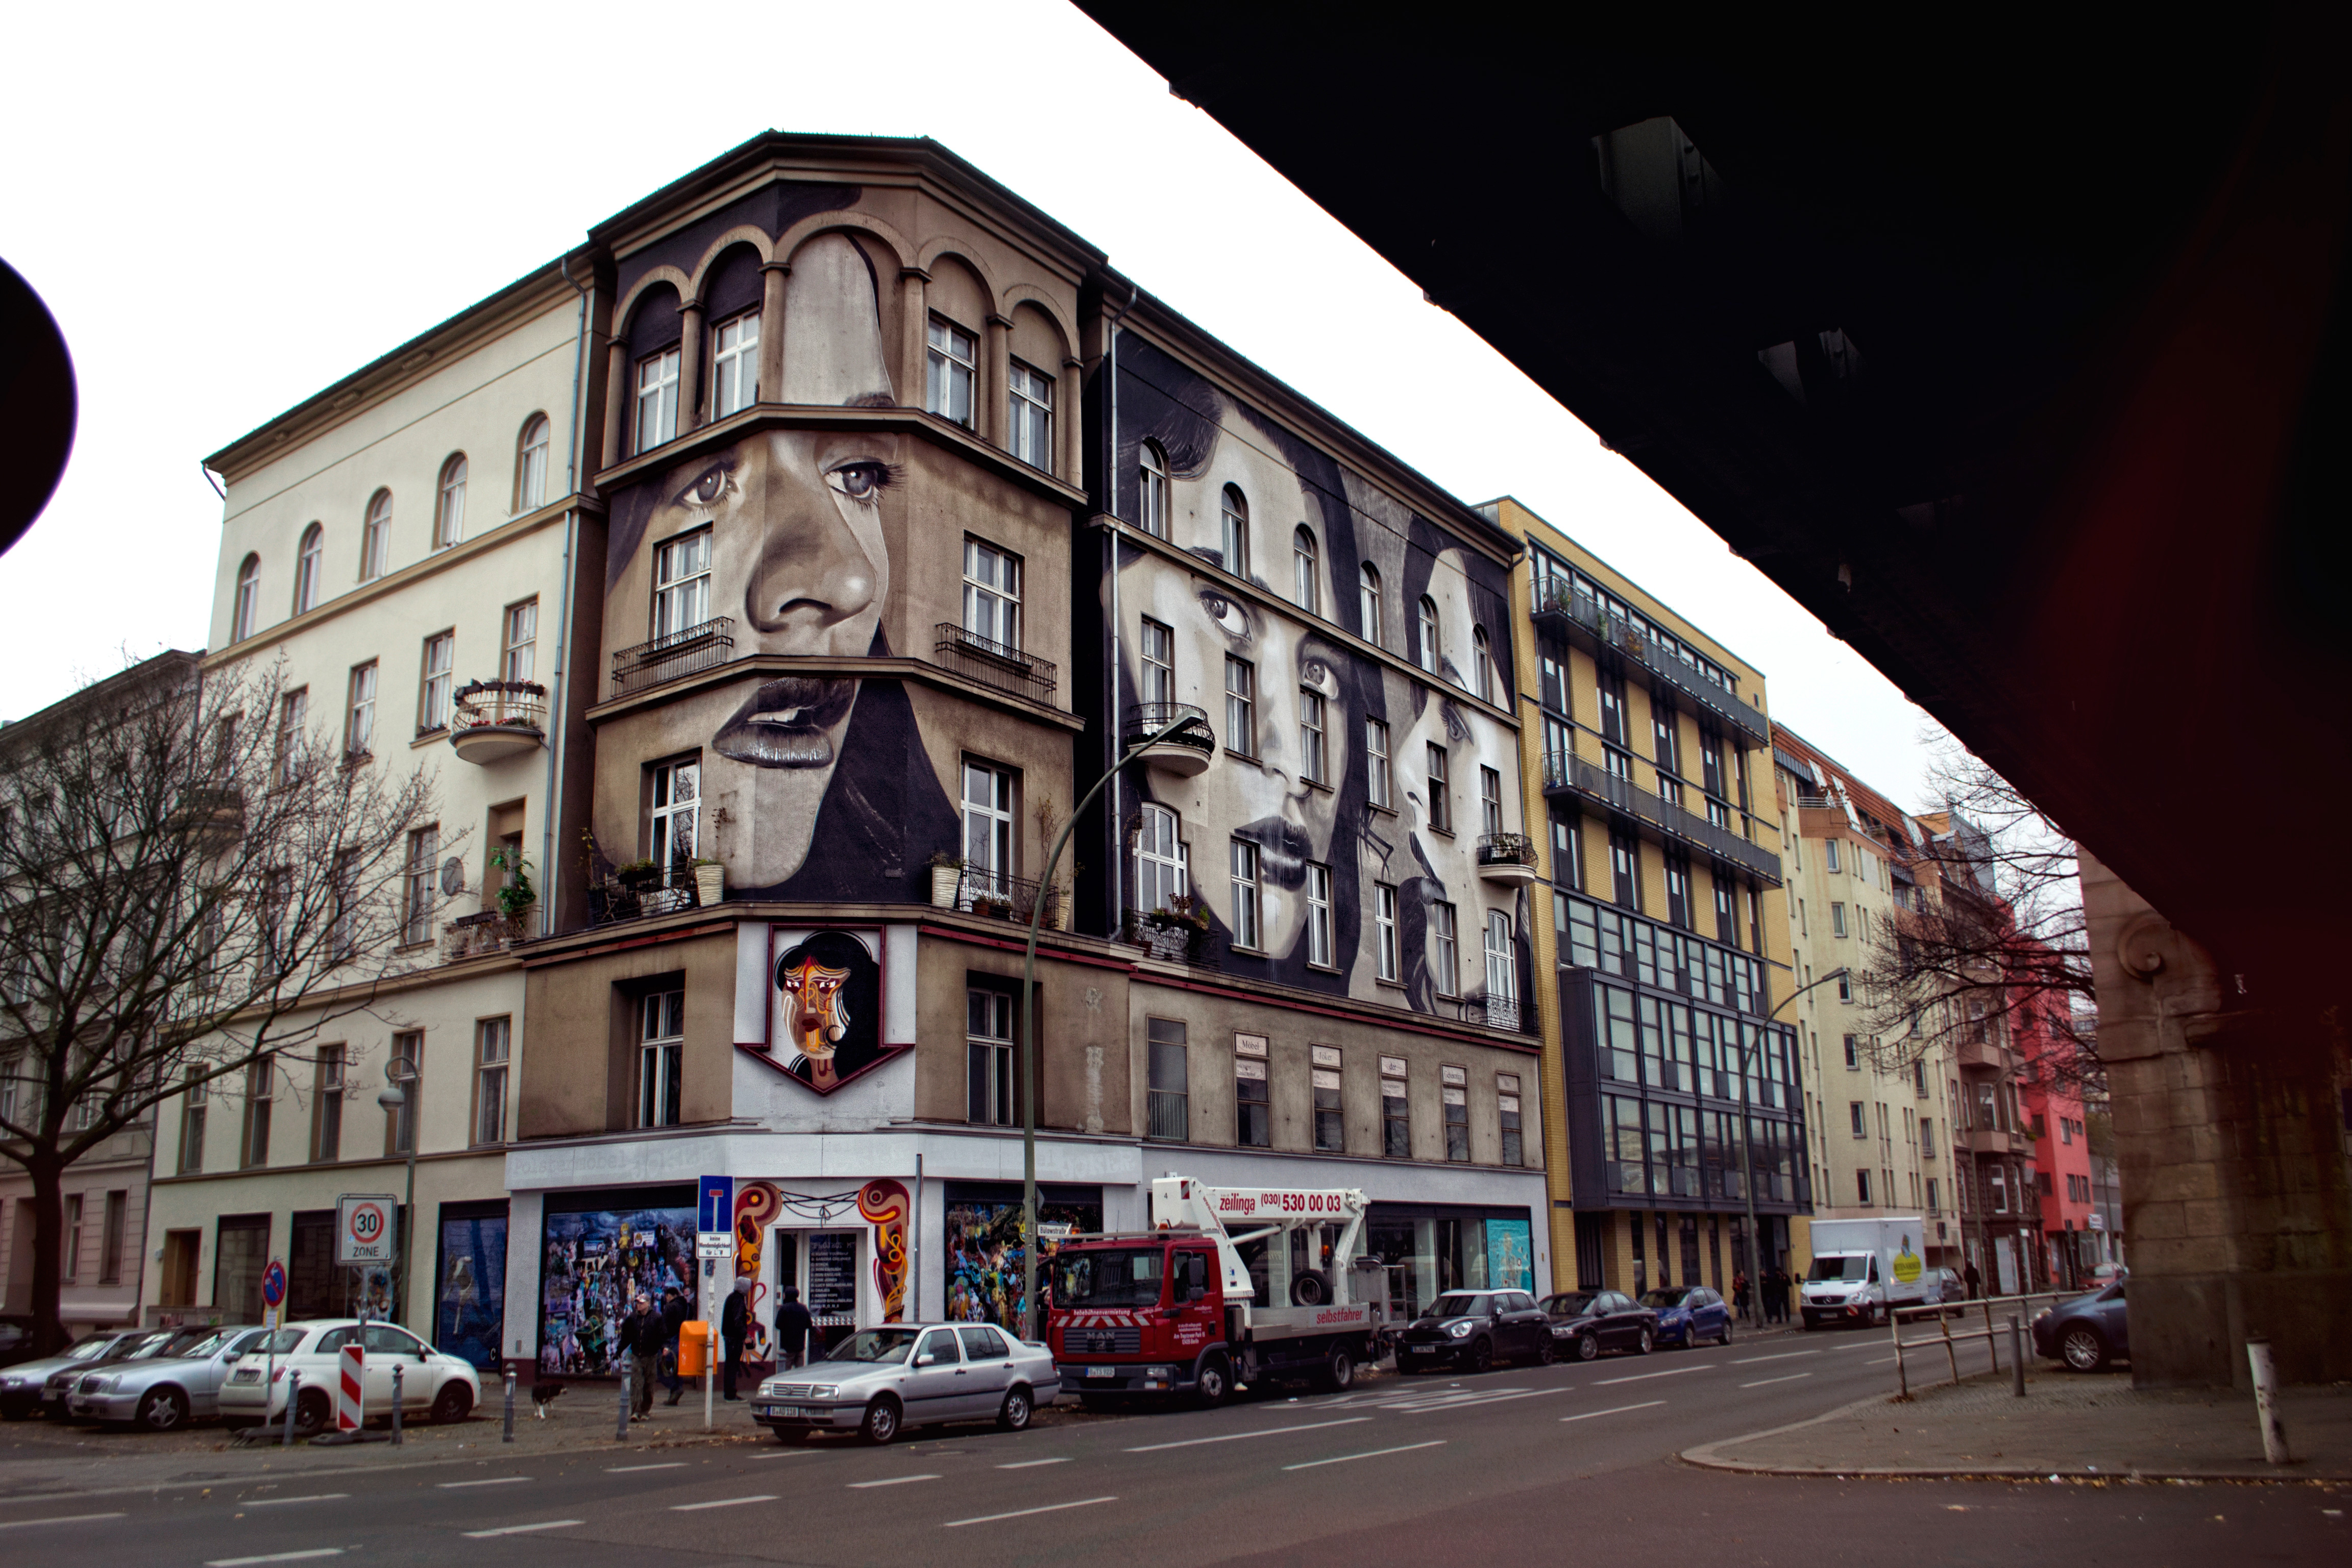 history of Project M/ Mural RONE